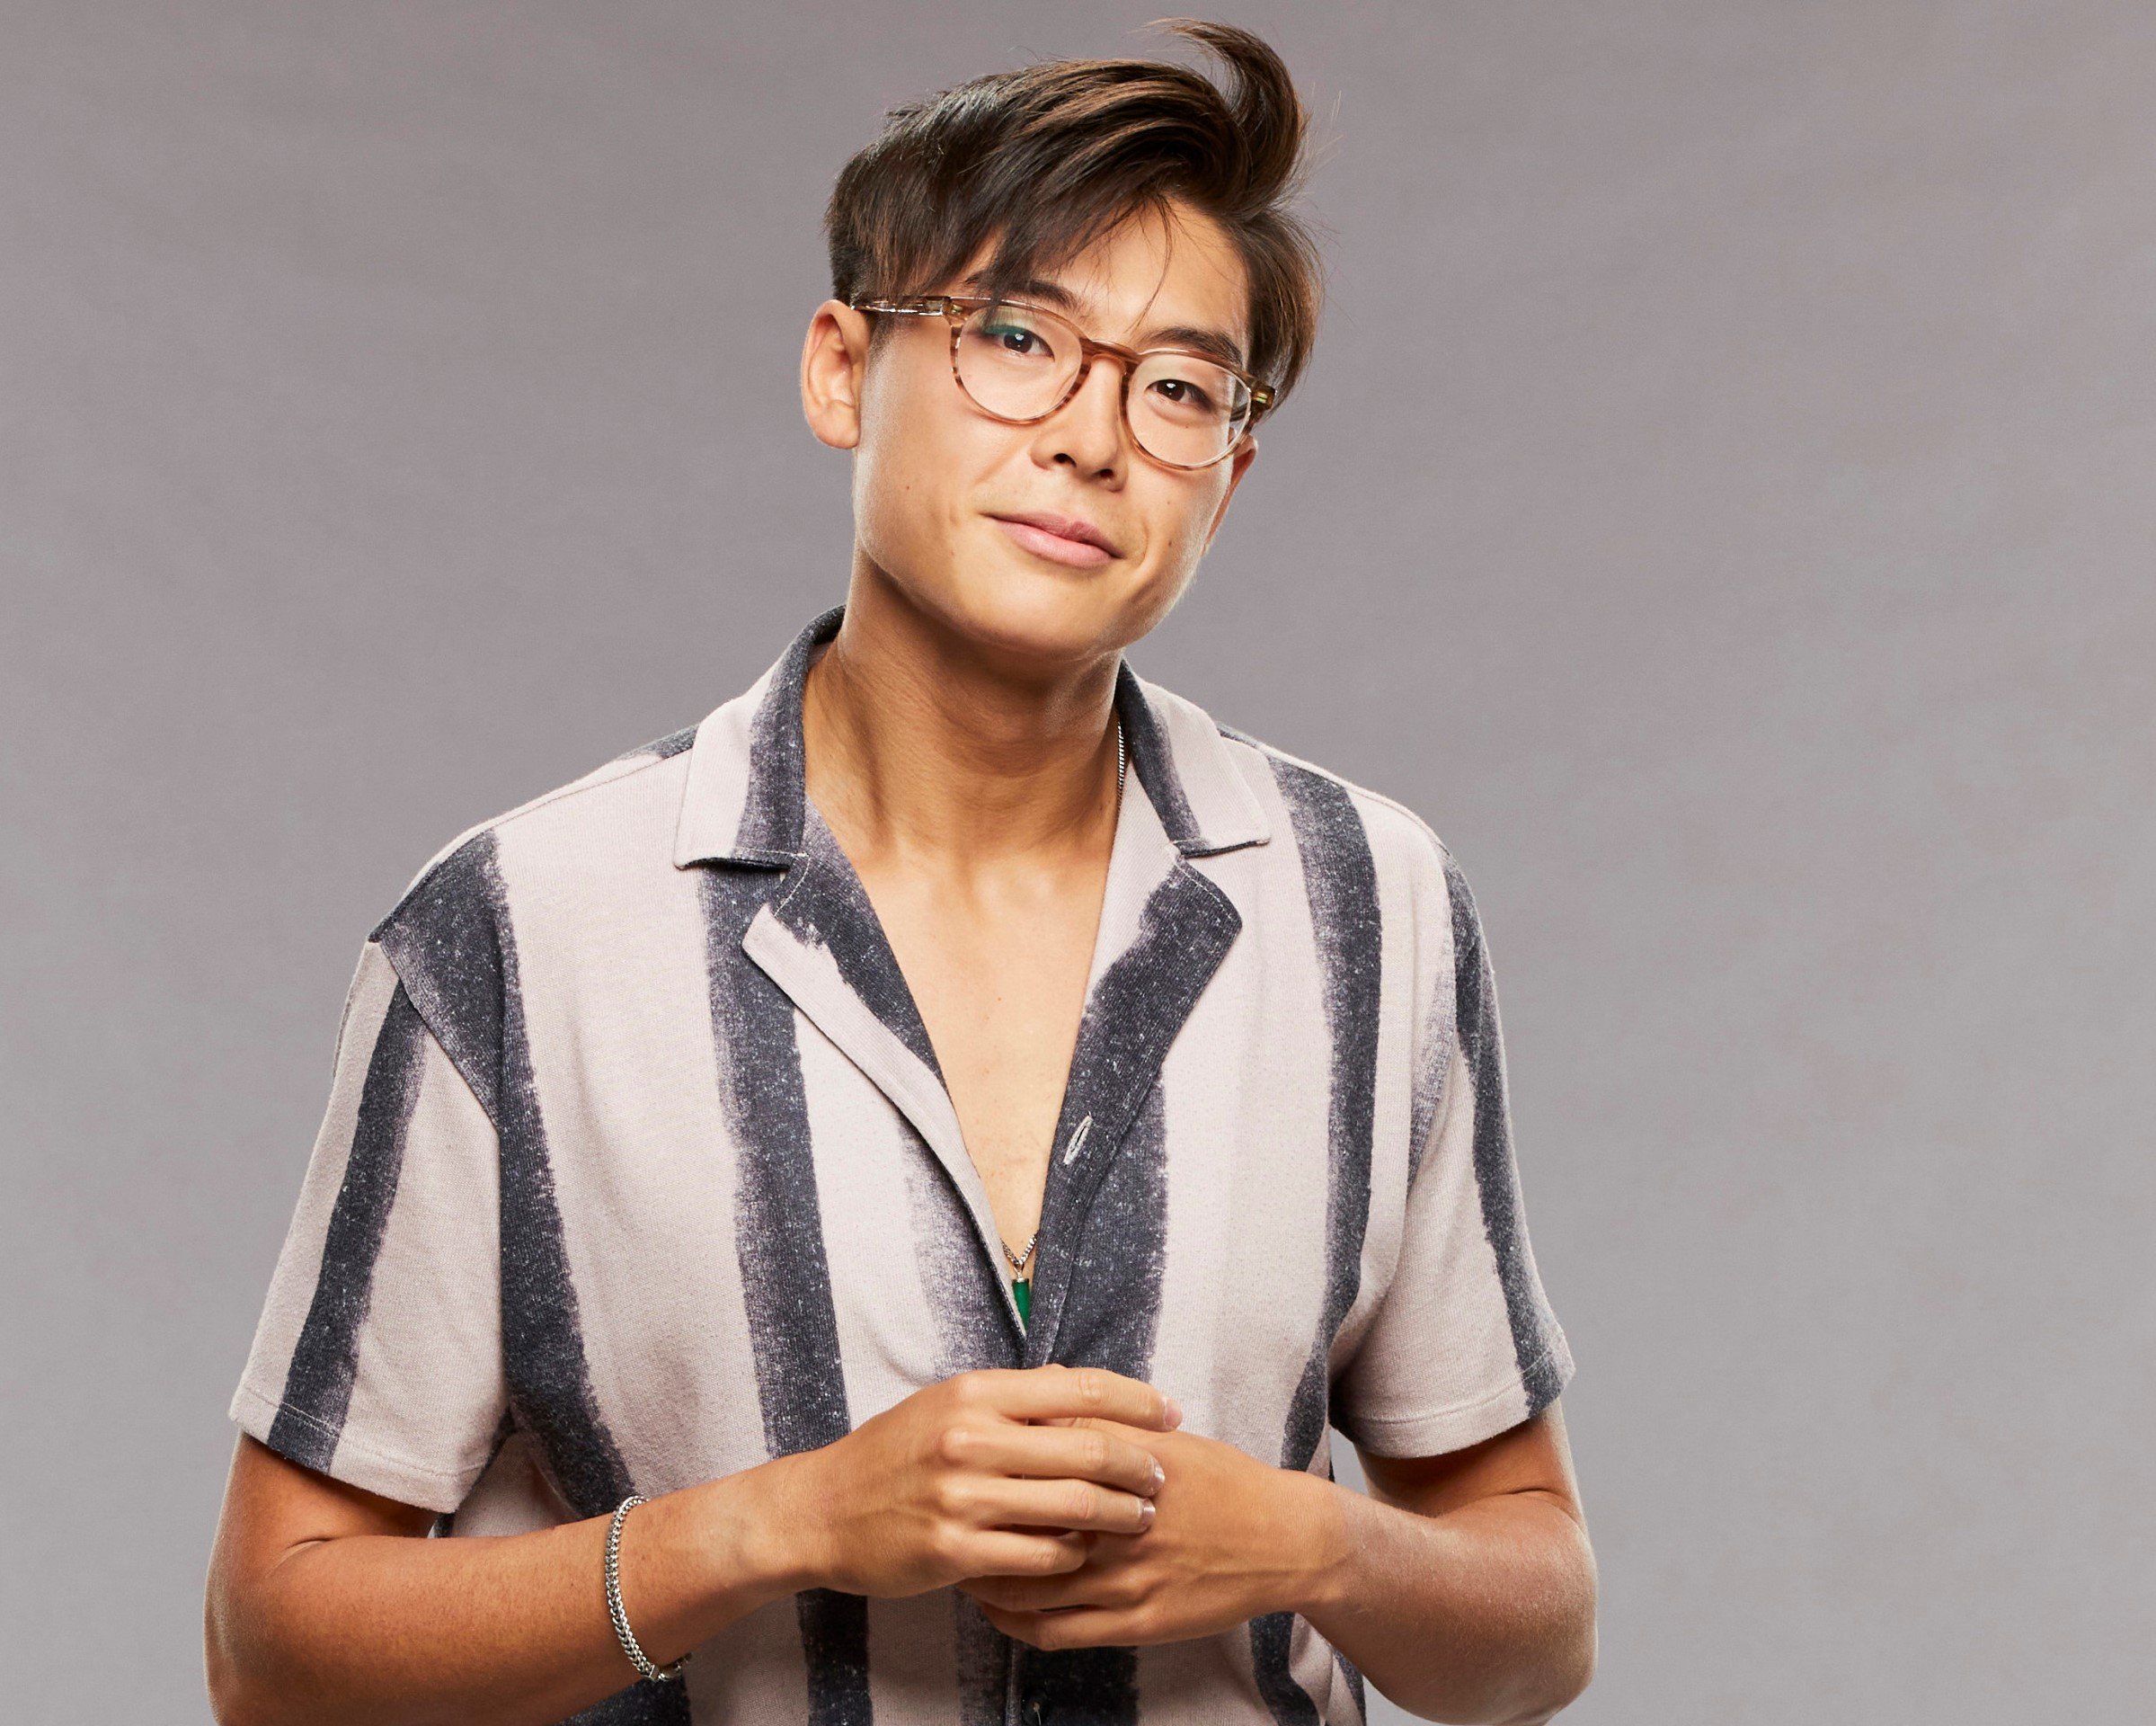 'Big Brother 23' star Derek Xiao, who is now dating fellow contestant Claire Rehfuss, wears a white shirt with black vertical stripes.